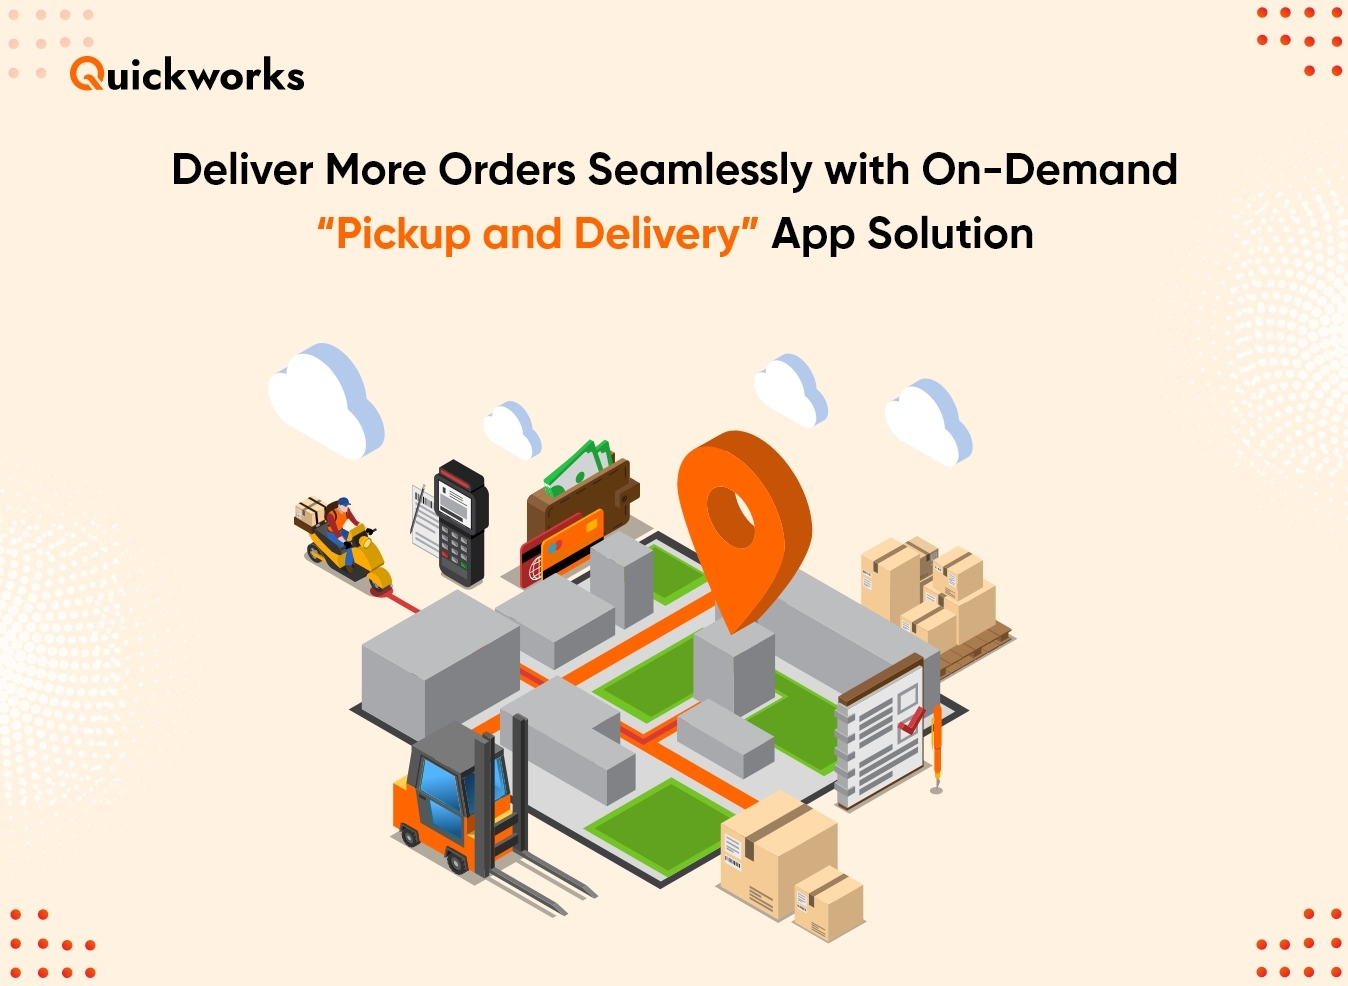 Deliver More Orders Seamlessly with On-Demand “Pickup and Delivery” App Solution